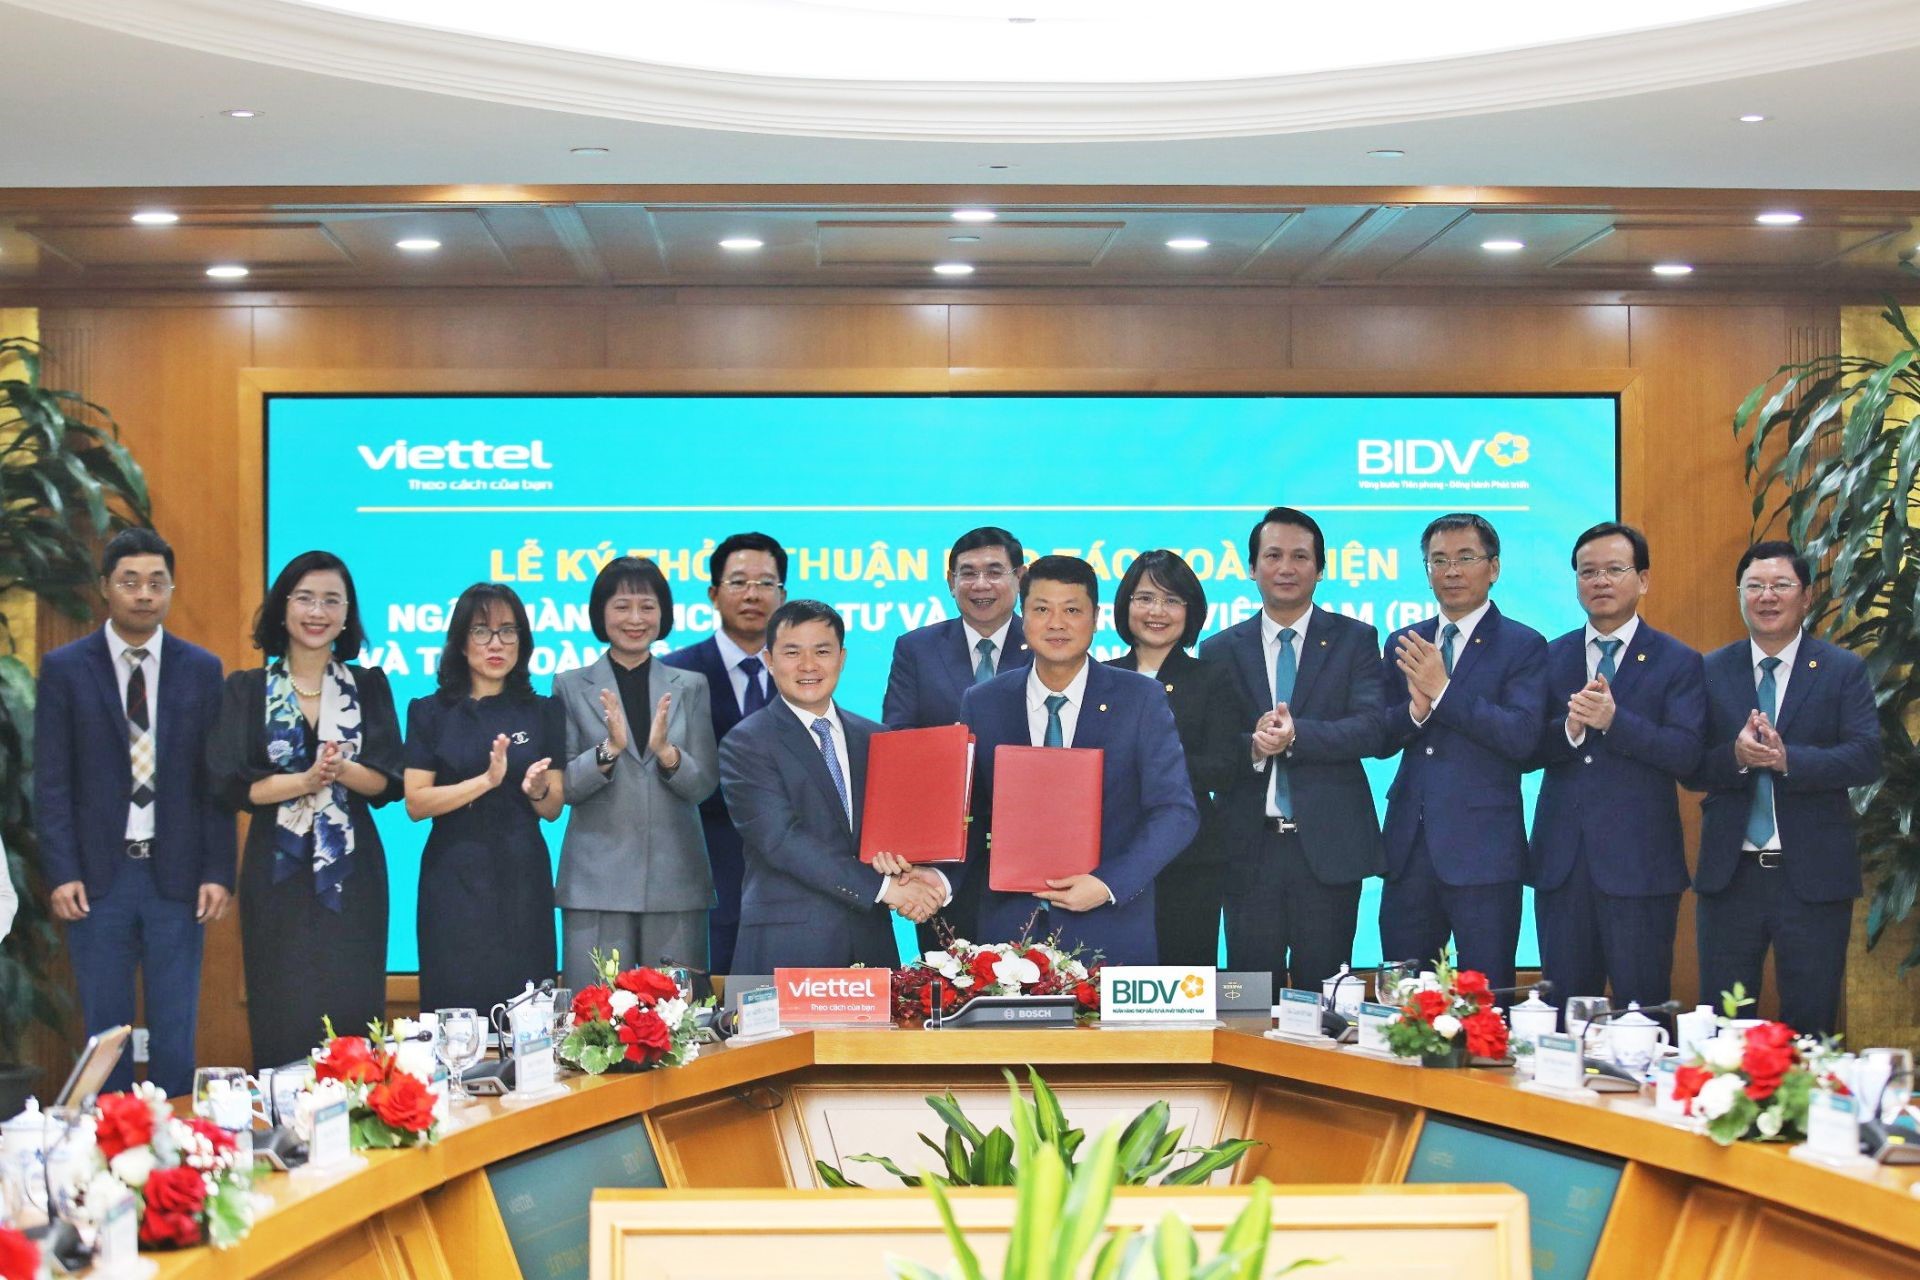 Mr. Tao Duc Thang (Chairman and General Director of Viettel Group) and Mr. Le Ngoc Lam (General Director of BIDV) represented the two units in signing a comprehensive cooperation agreement for the period 2024-2028.